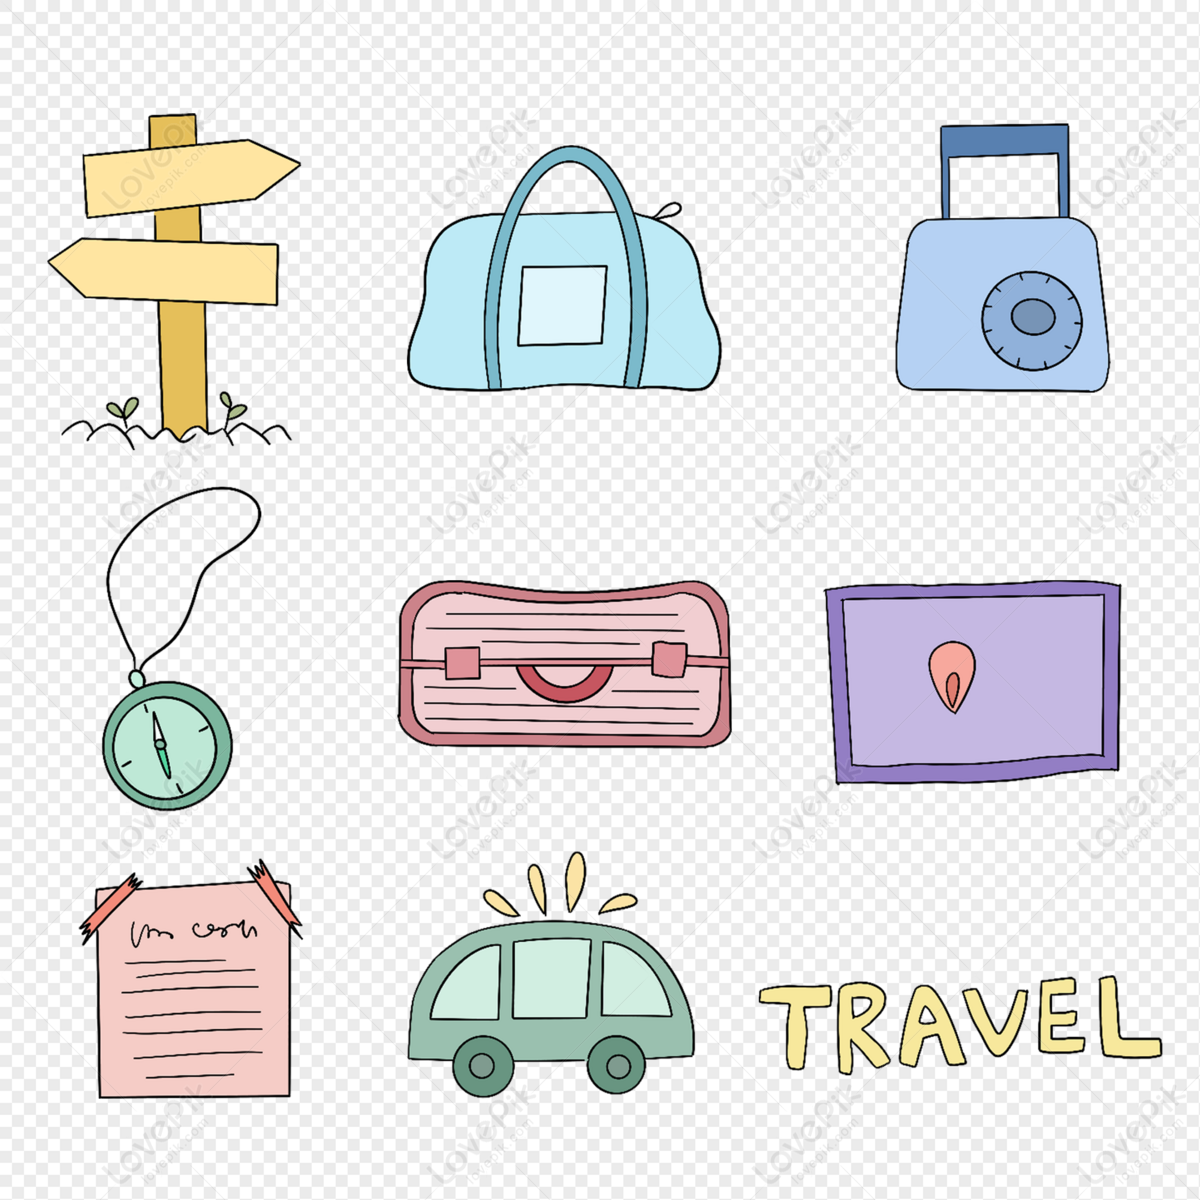 National Day holiday travel items, national holiday, holiday day, travel day png hd transparent image